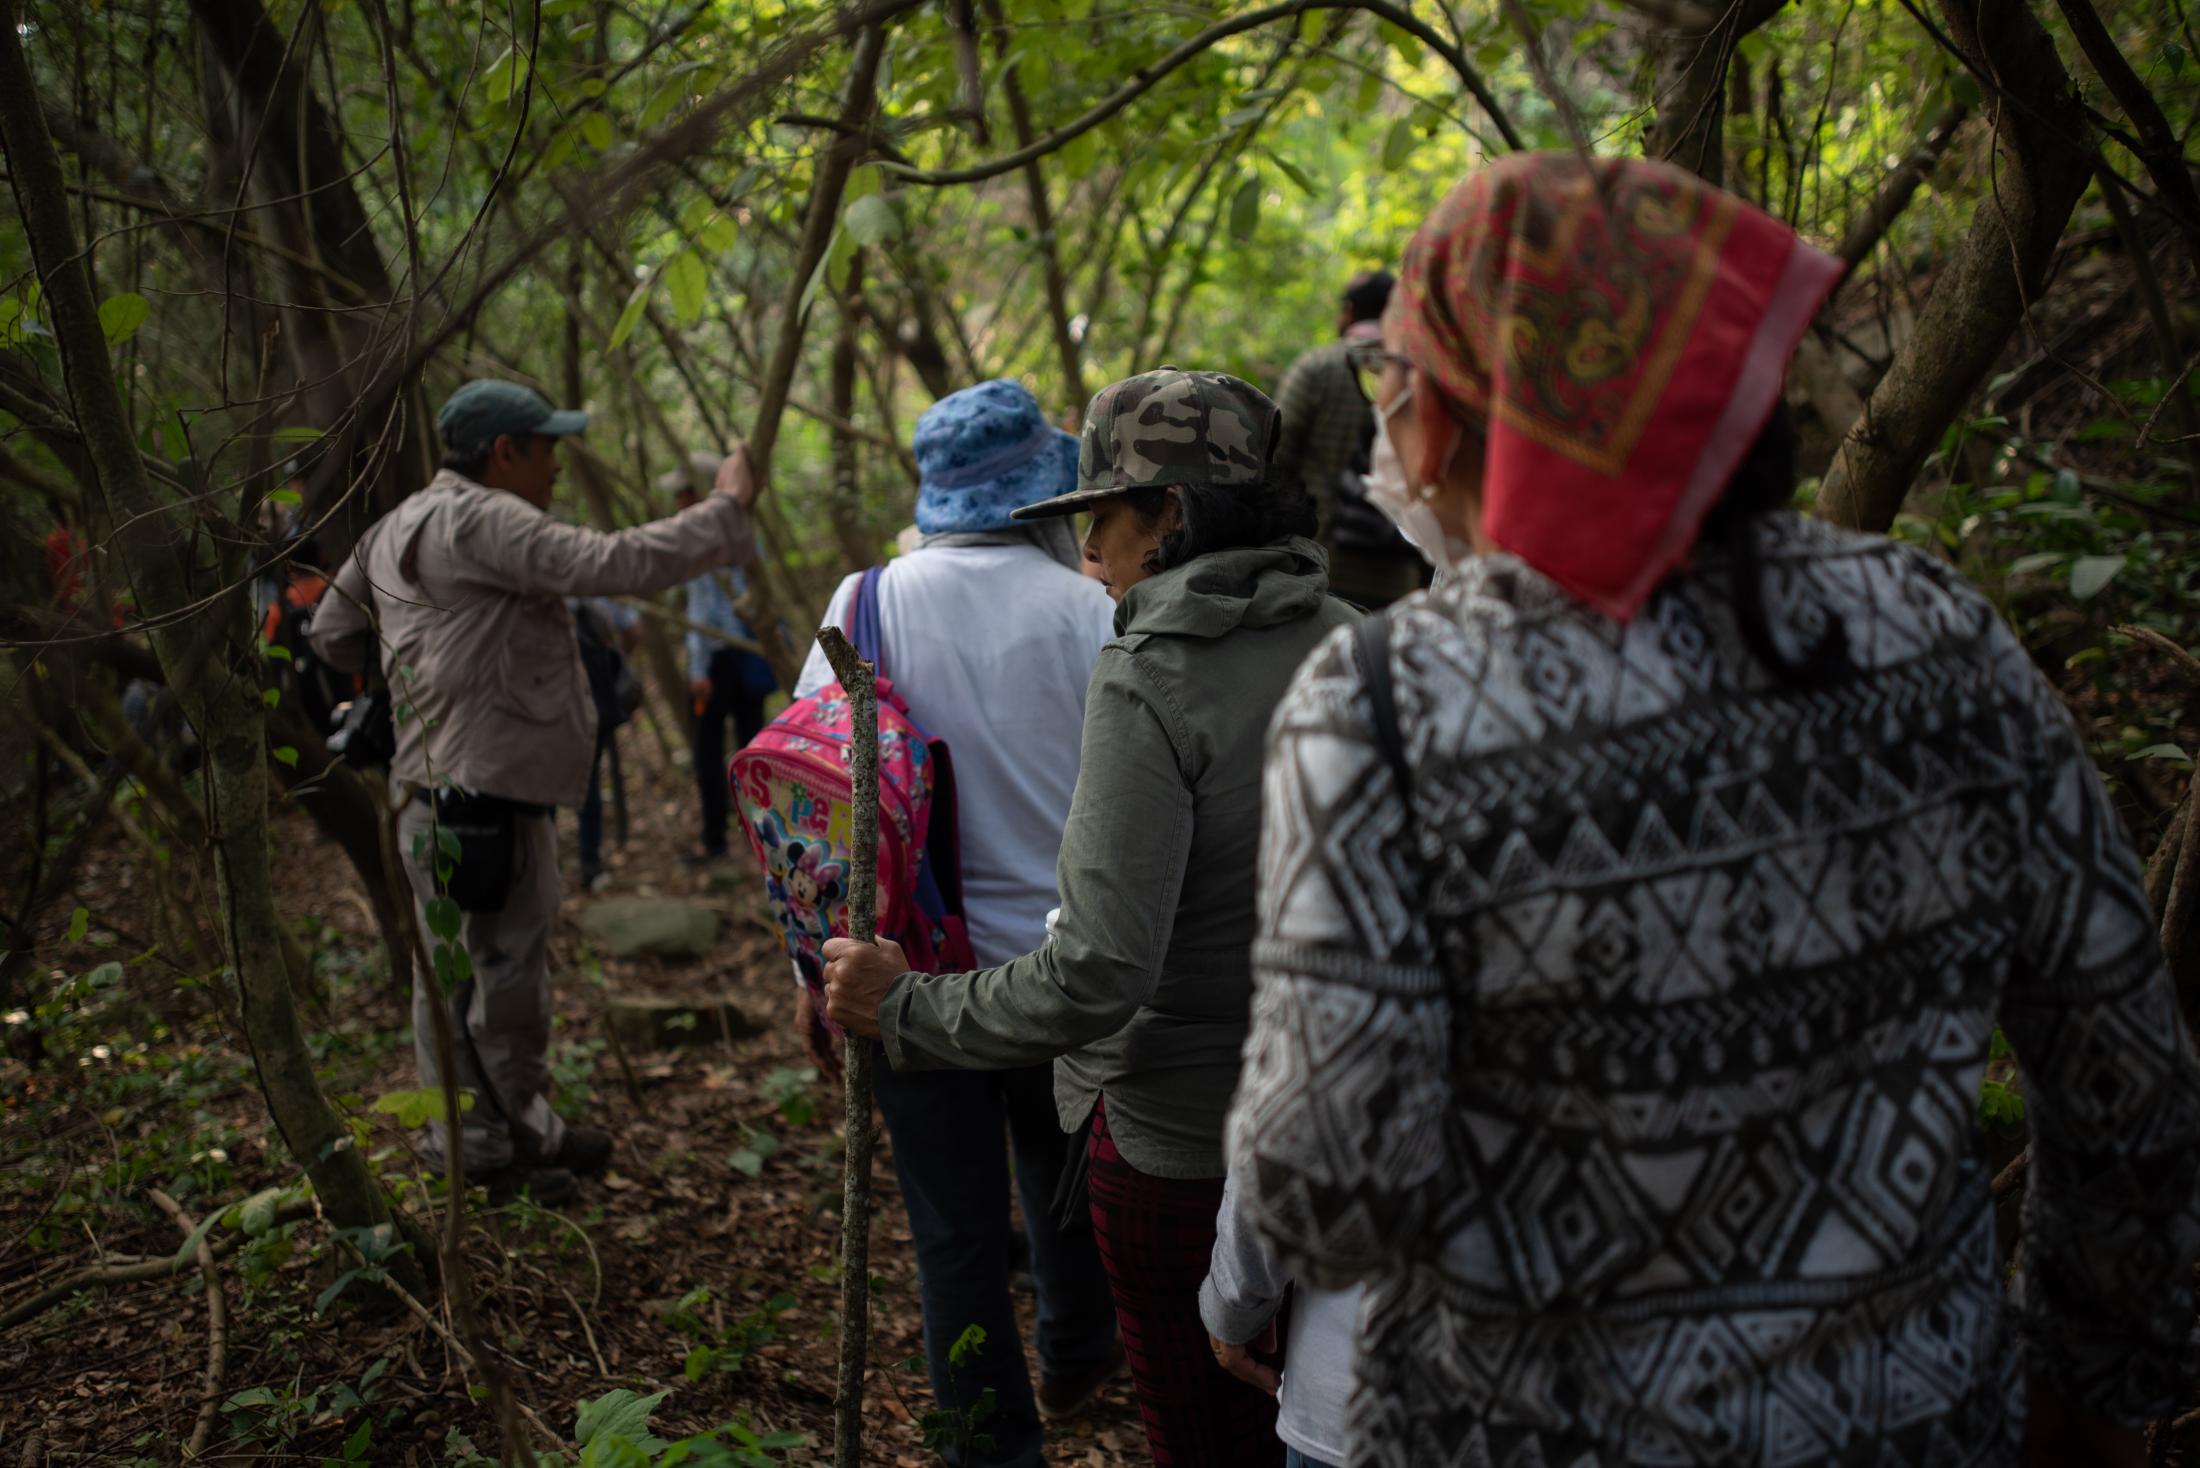 A group of seekers of missing persons walks through field that is investigated by police authorities and family groups participating in the fifth National Missing Persons Search Brigade in Tihuatlan, Veracruz, Mexico, on February 20, 2020. Victoria Razo for NPR